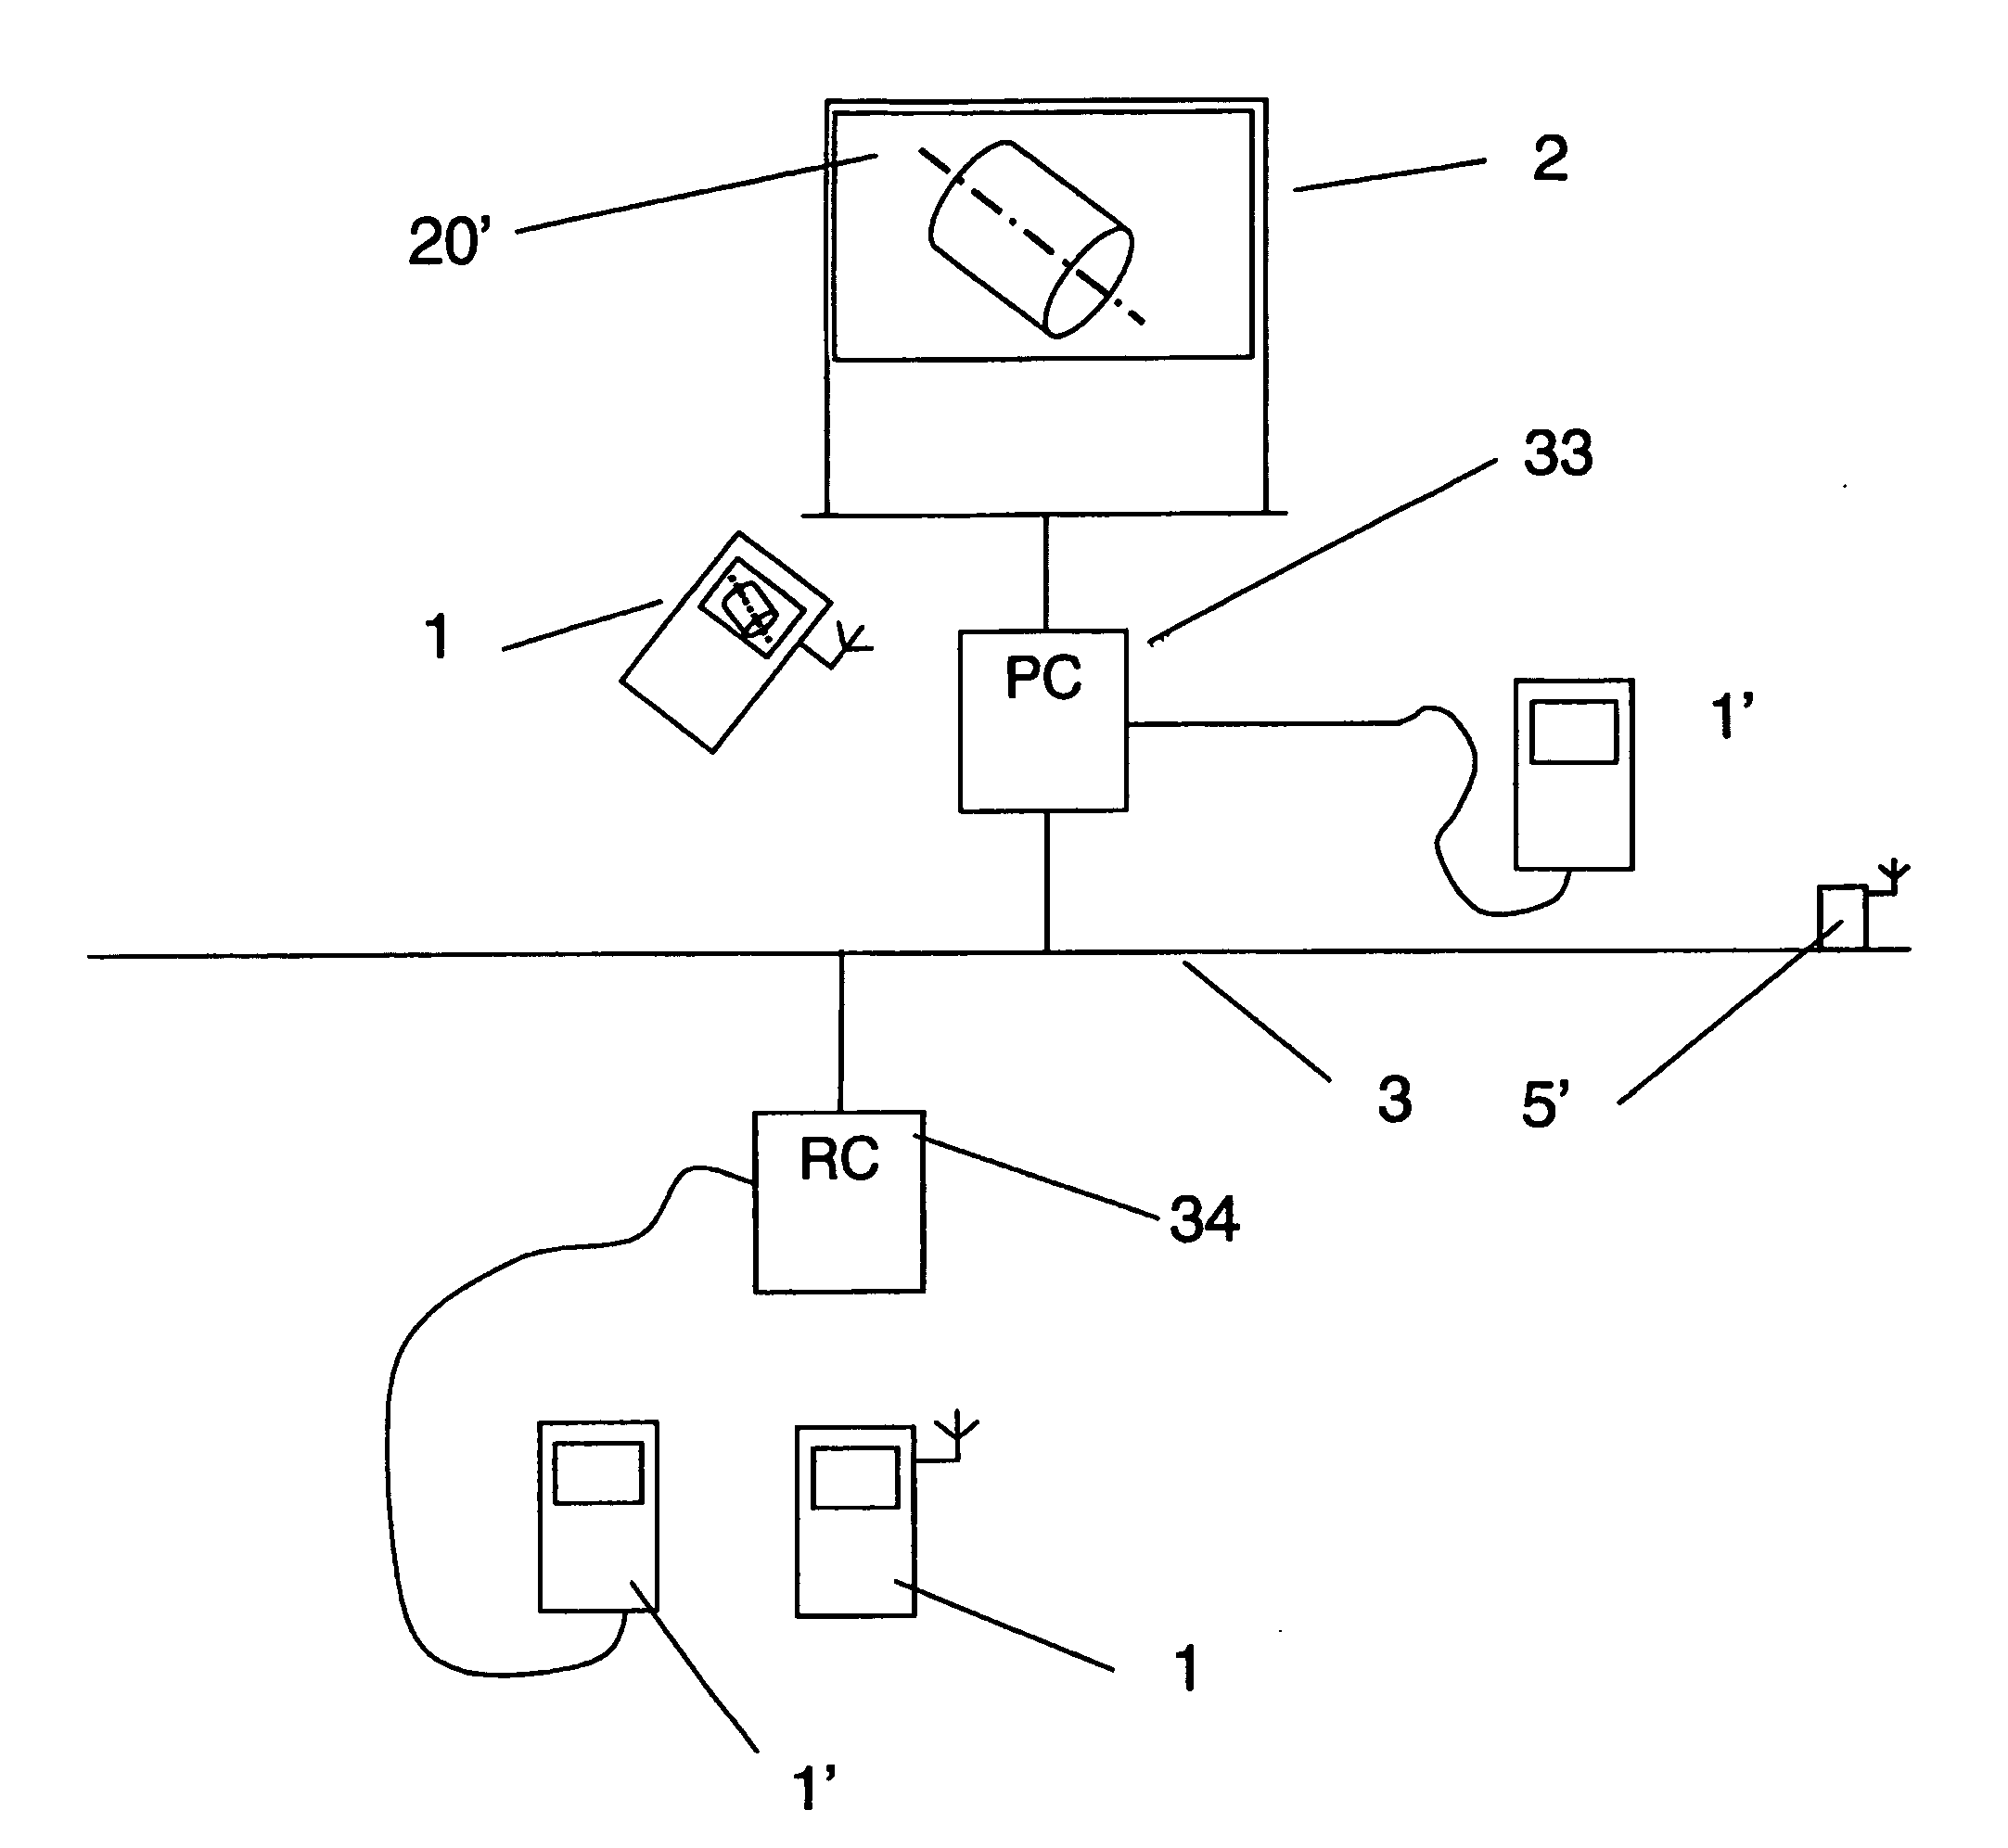 Method and System to Retrieve and Display Technical Data for an Industrial Device